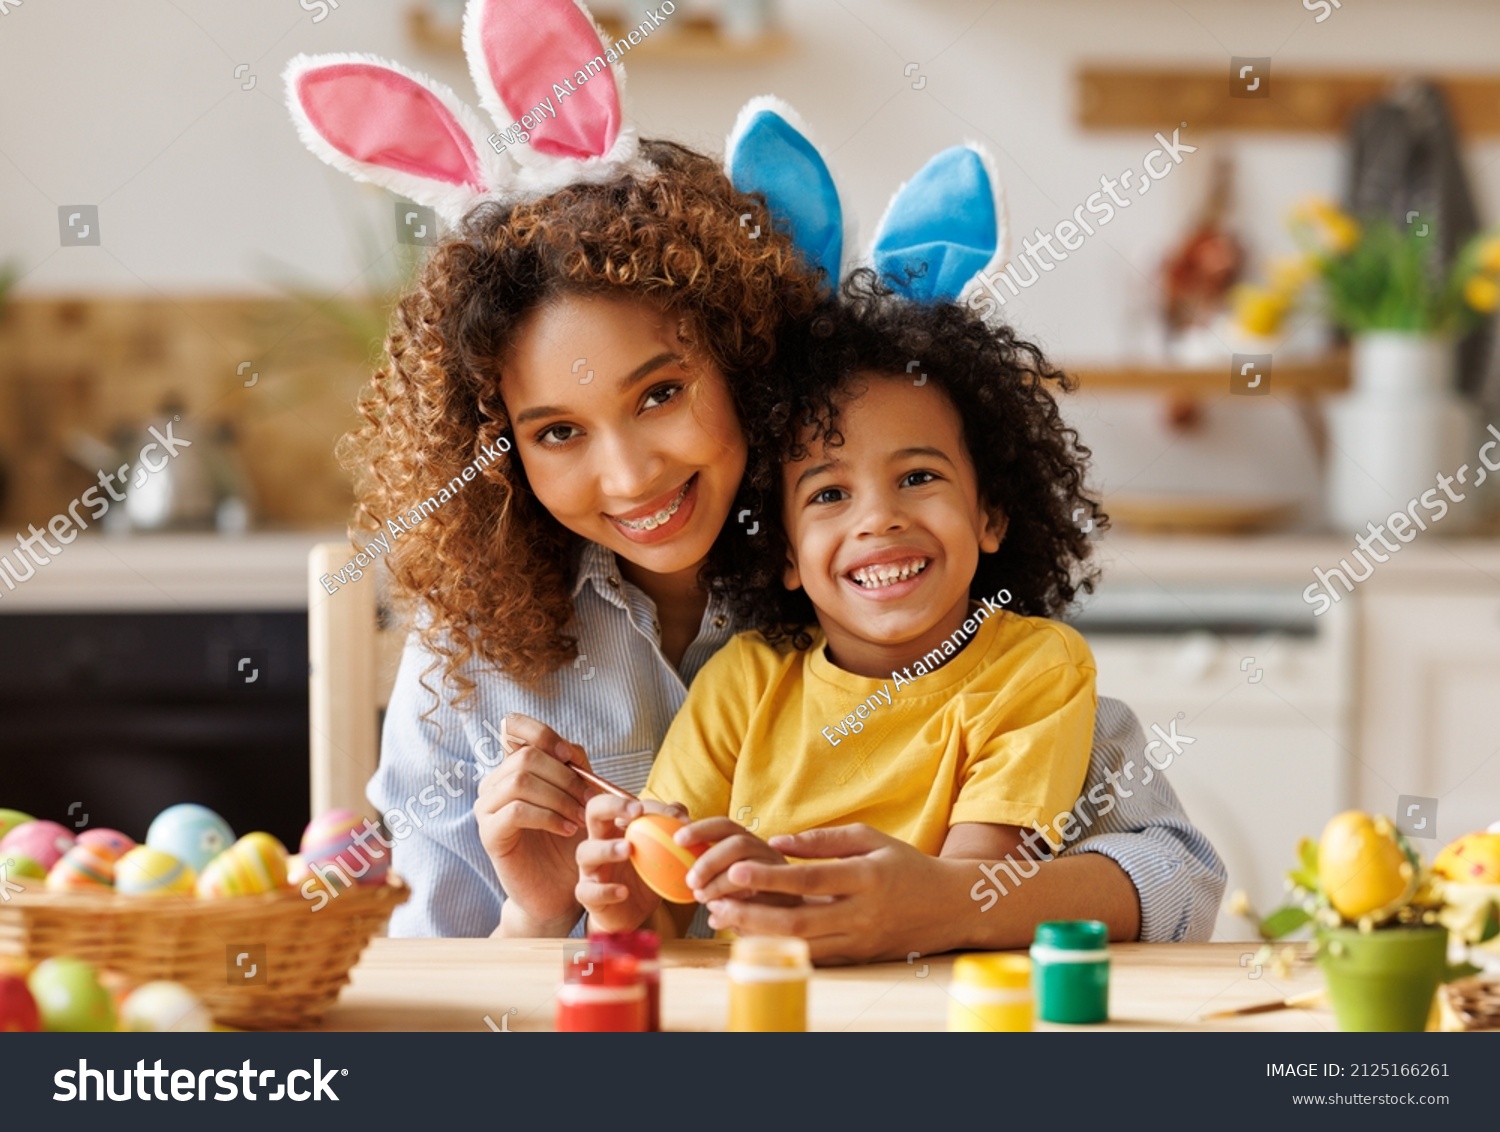 Easter Family traditions. Loving ethnic young mother teaching happy little kid soon to dye and decorate eggs with paints for Easter holidays while sitting together at kitchen table  #2125166261